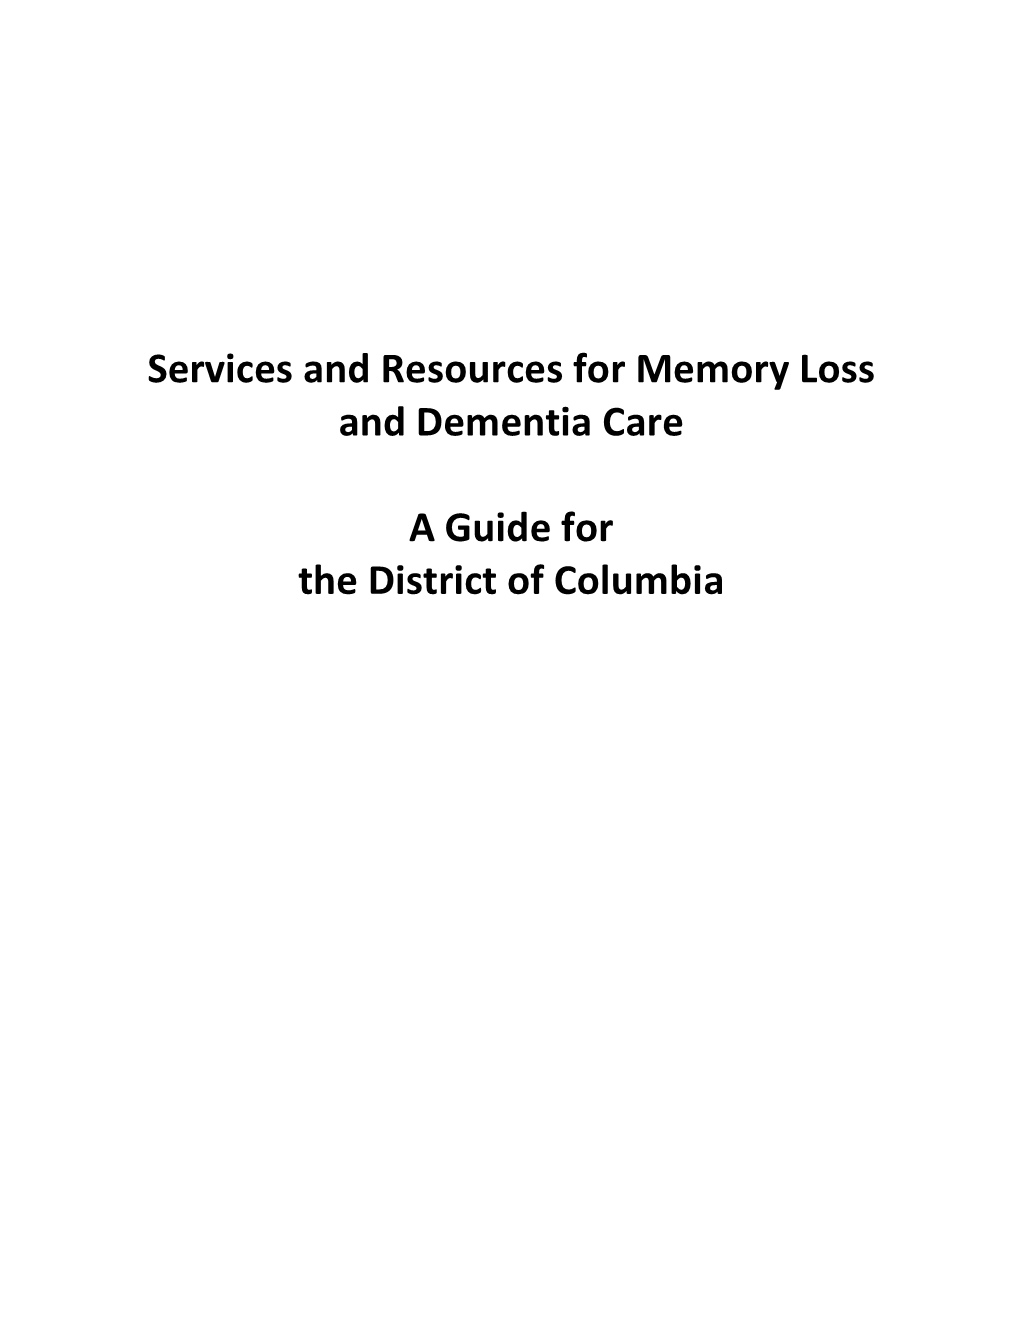 Services and Resources for Memory Loss and Dementia Care a Guide for the District of Columbia